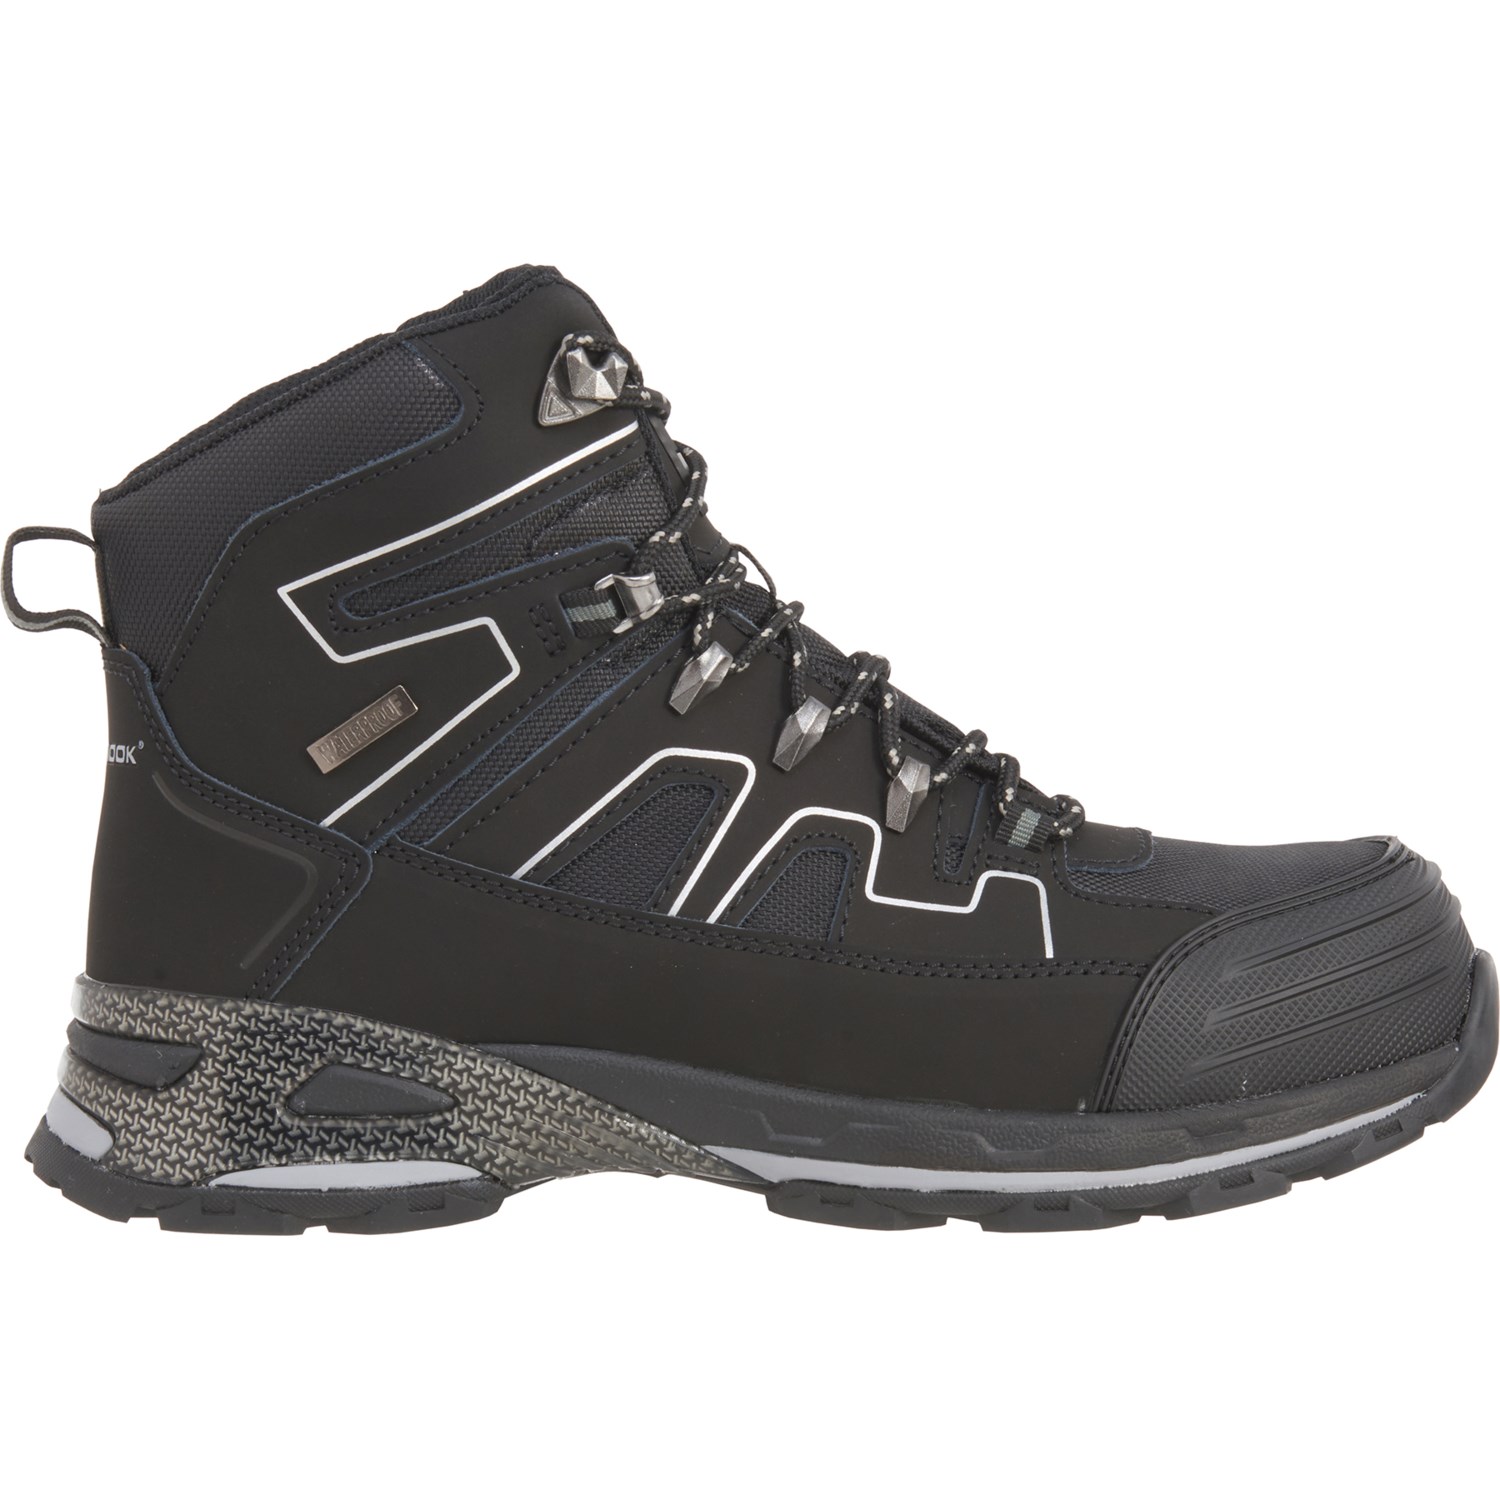 Chinook Panther Work Boots (For Men) - Save 56%